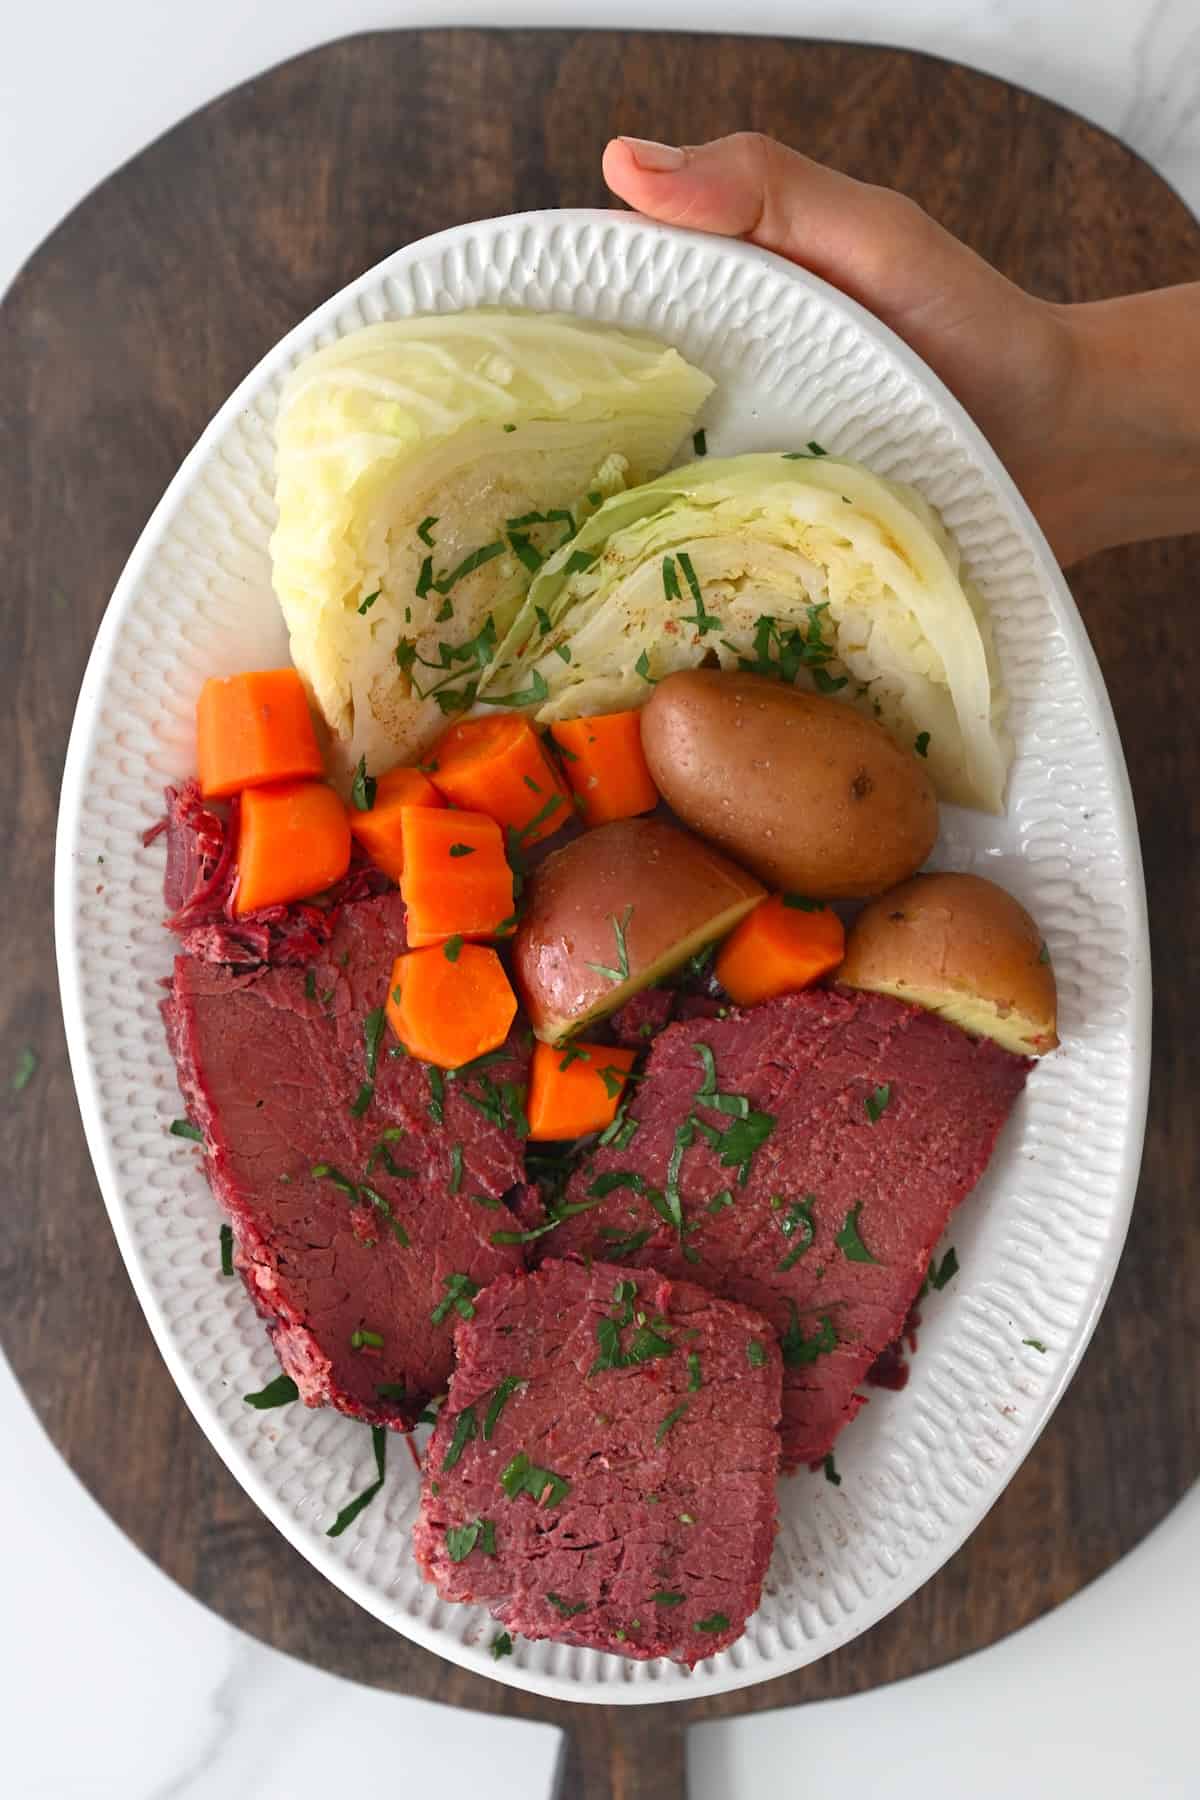 Corned beef and cabbage on a plate with potatoes and carrots